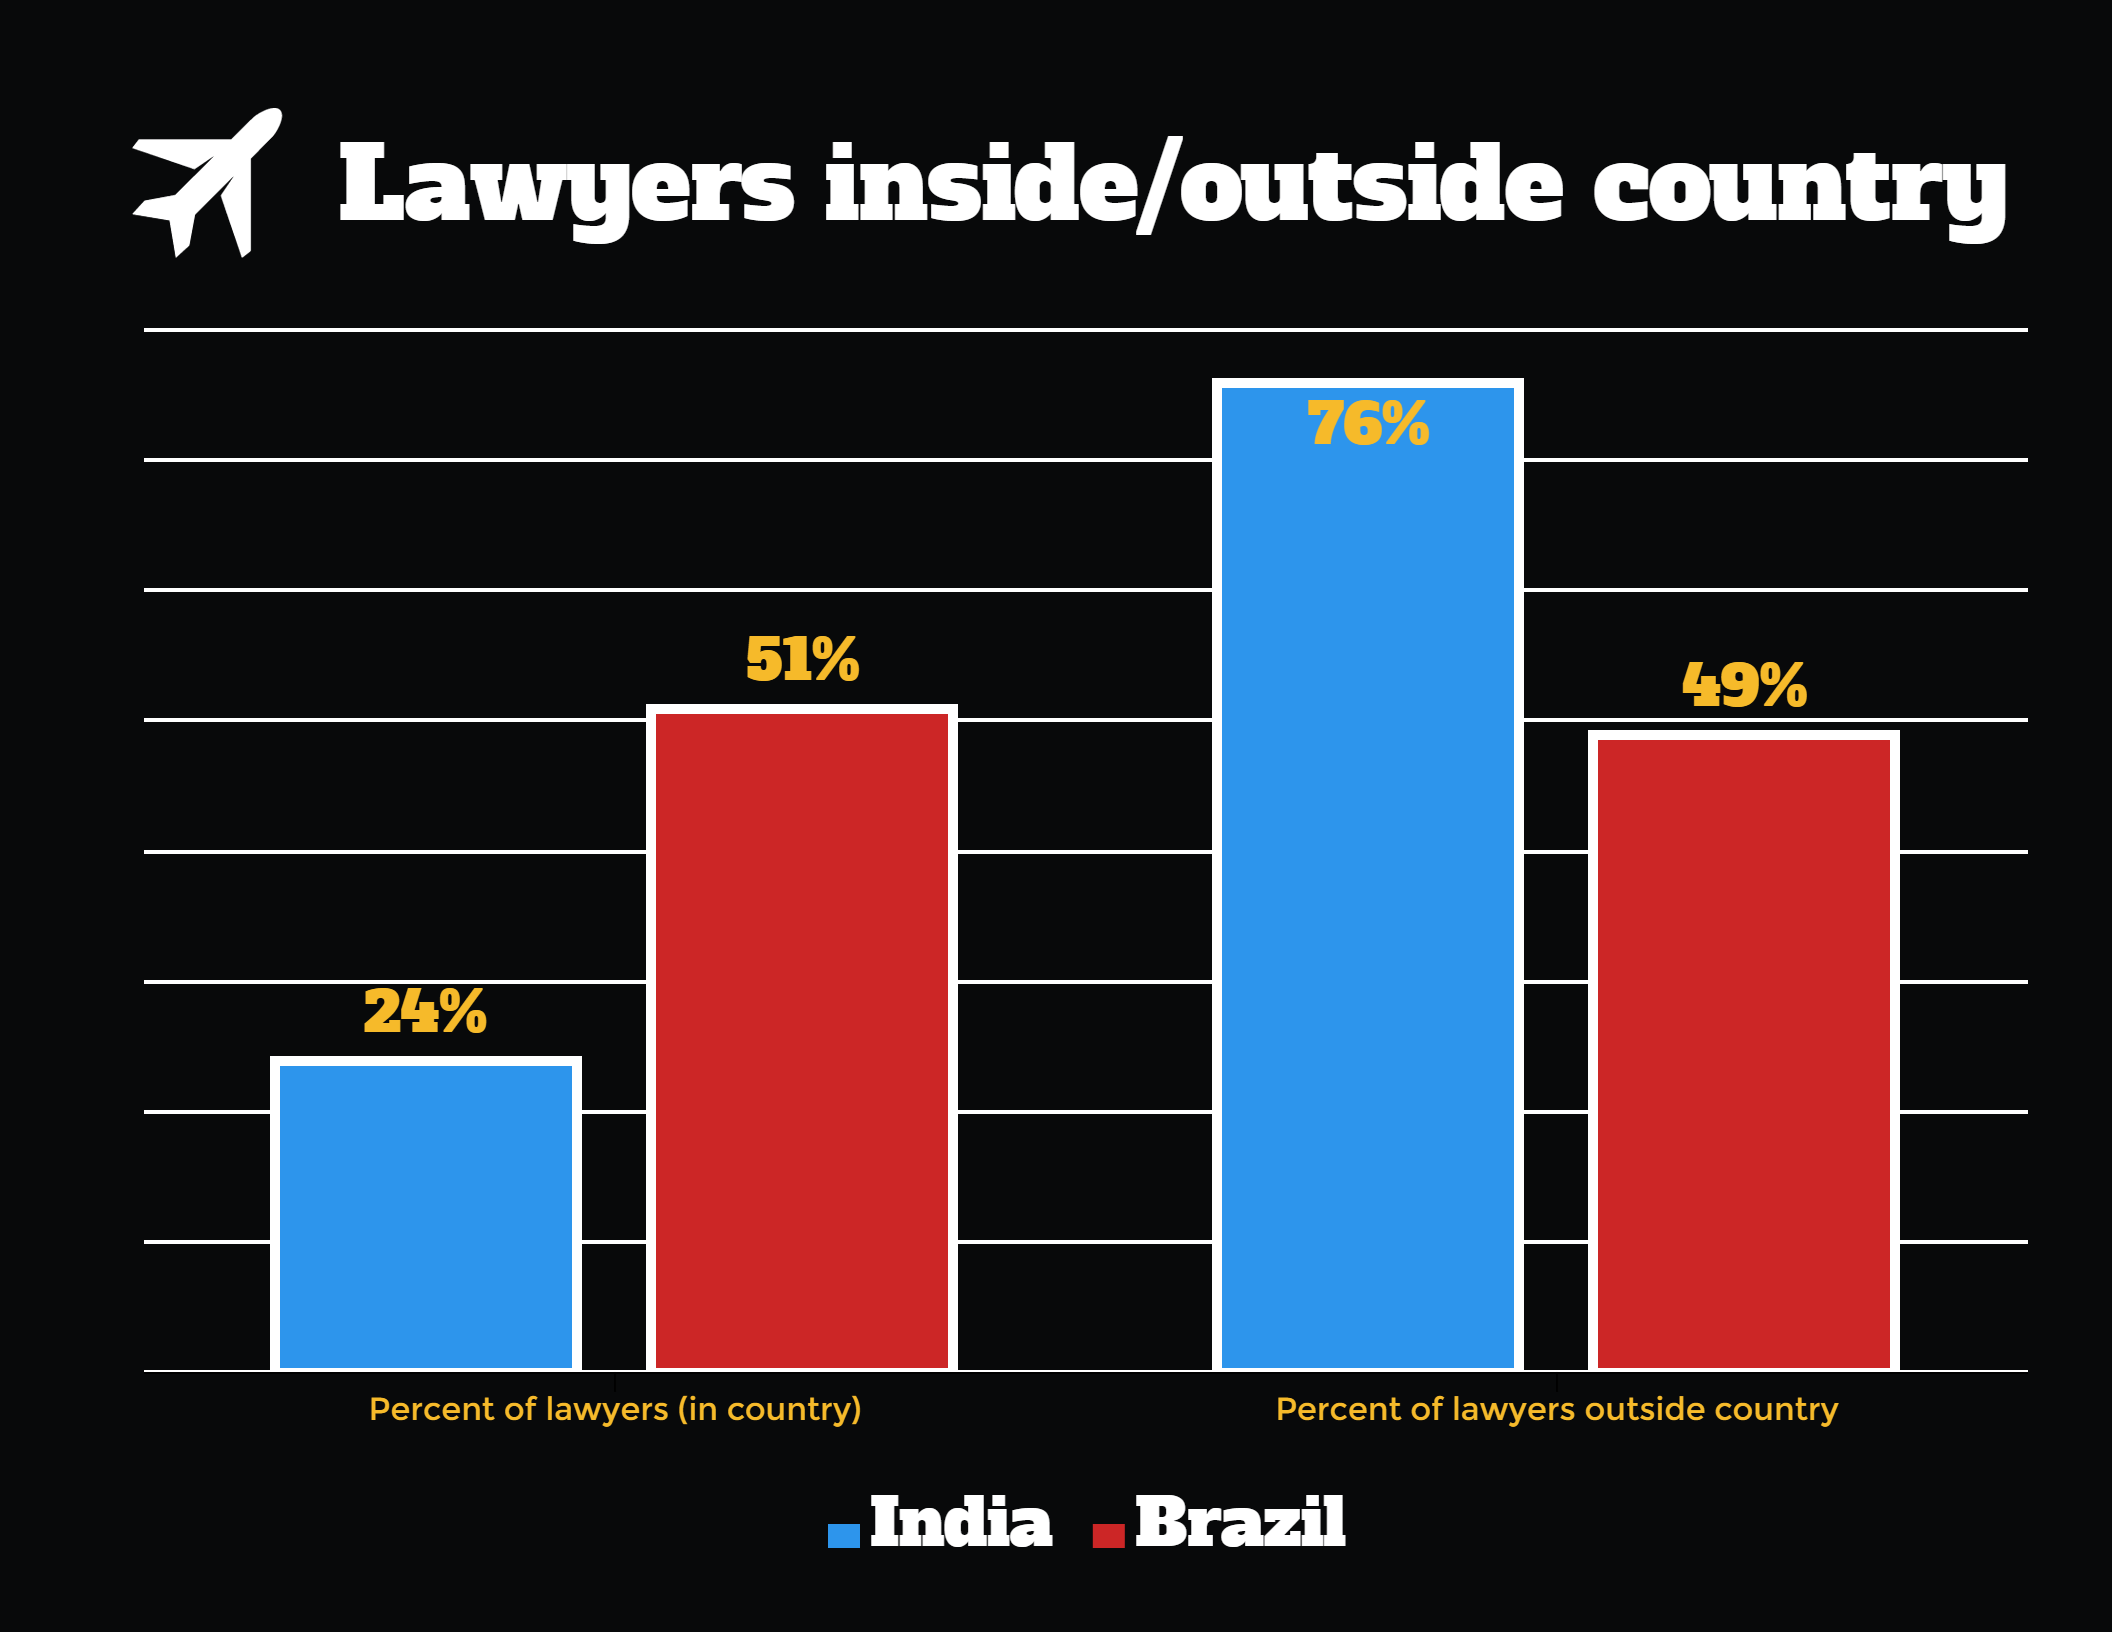 Percent of lawyers inside/outside India and Brazil.